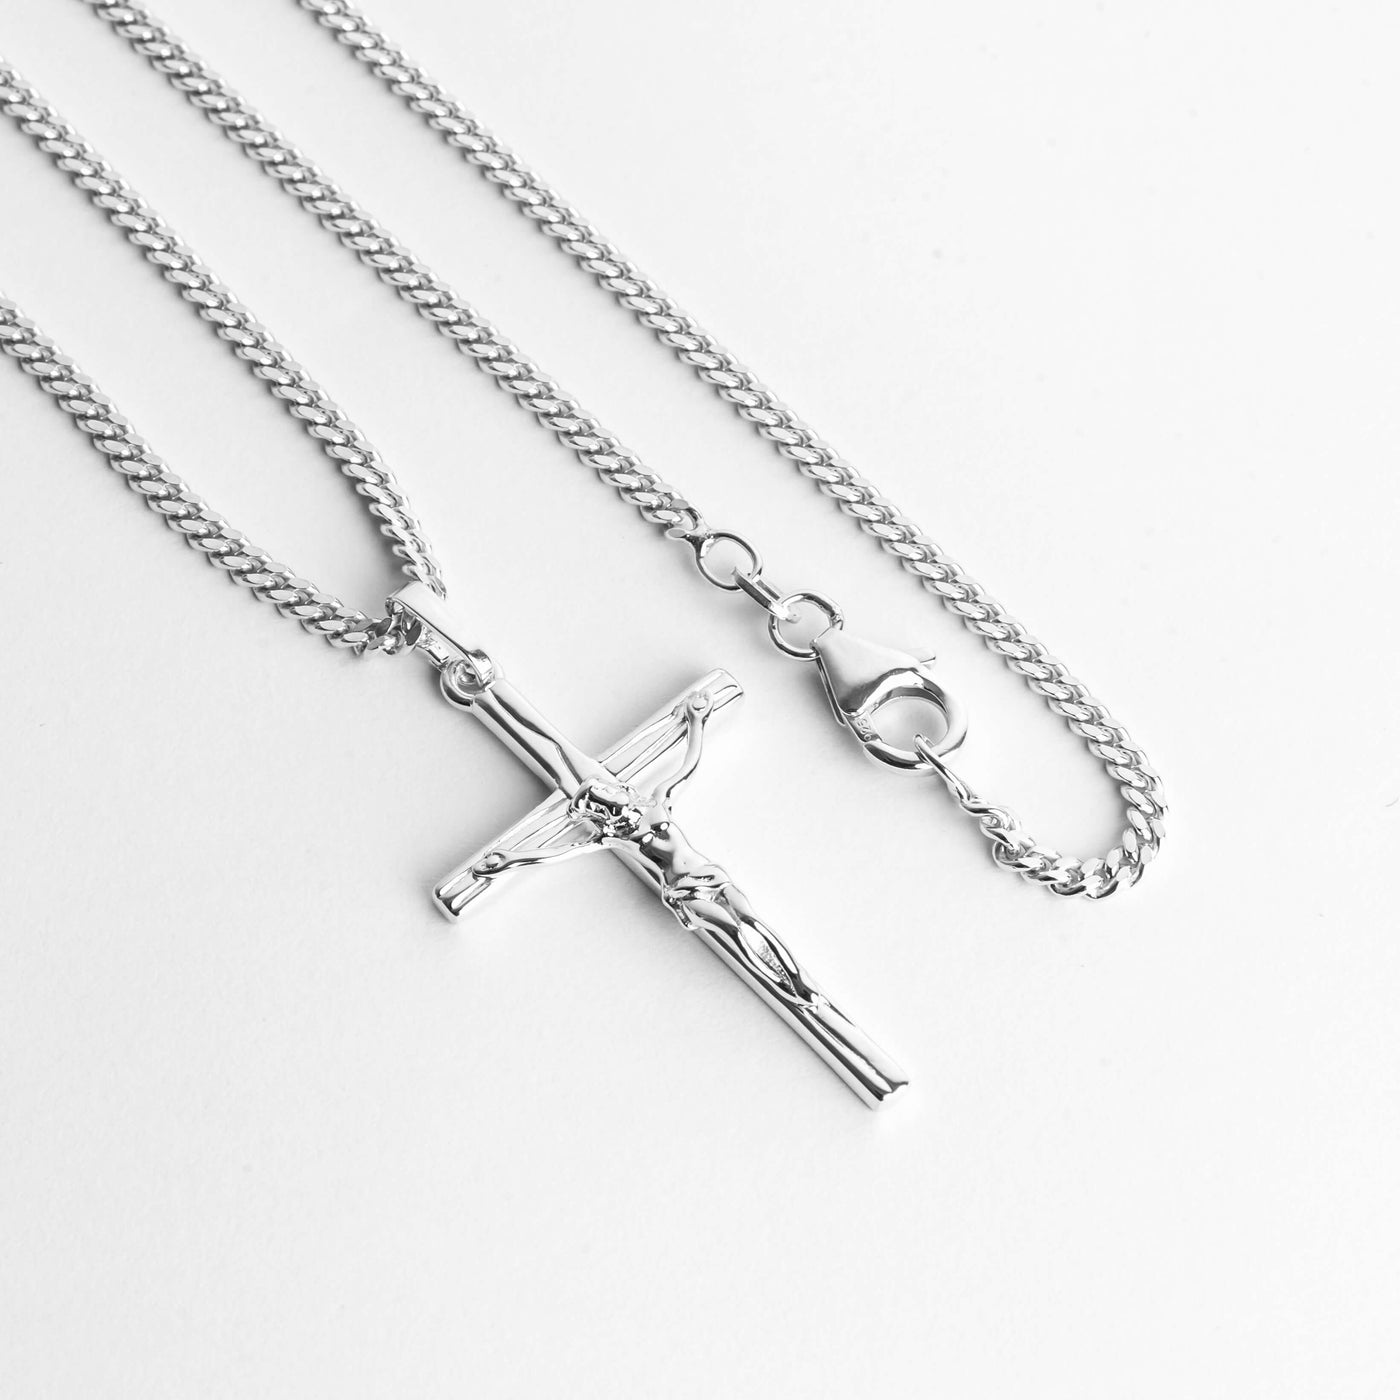 CROSS BODY NECKLACE 925 SILVER RHODIUM PLATED